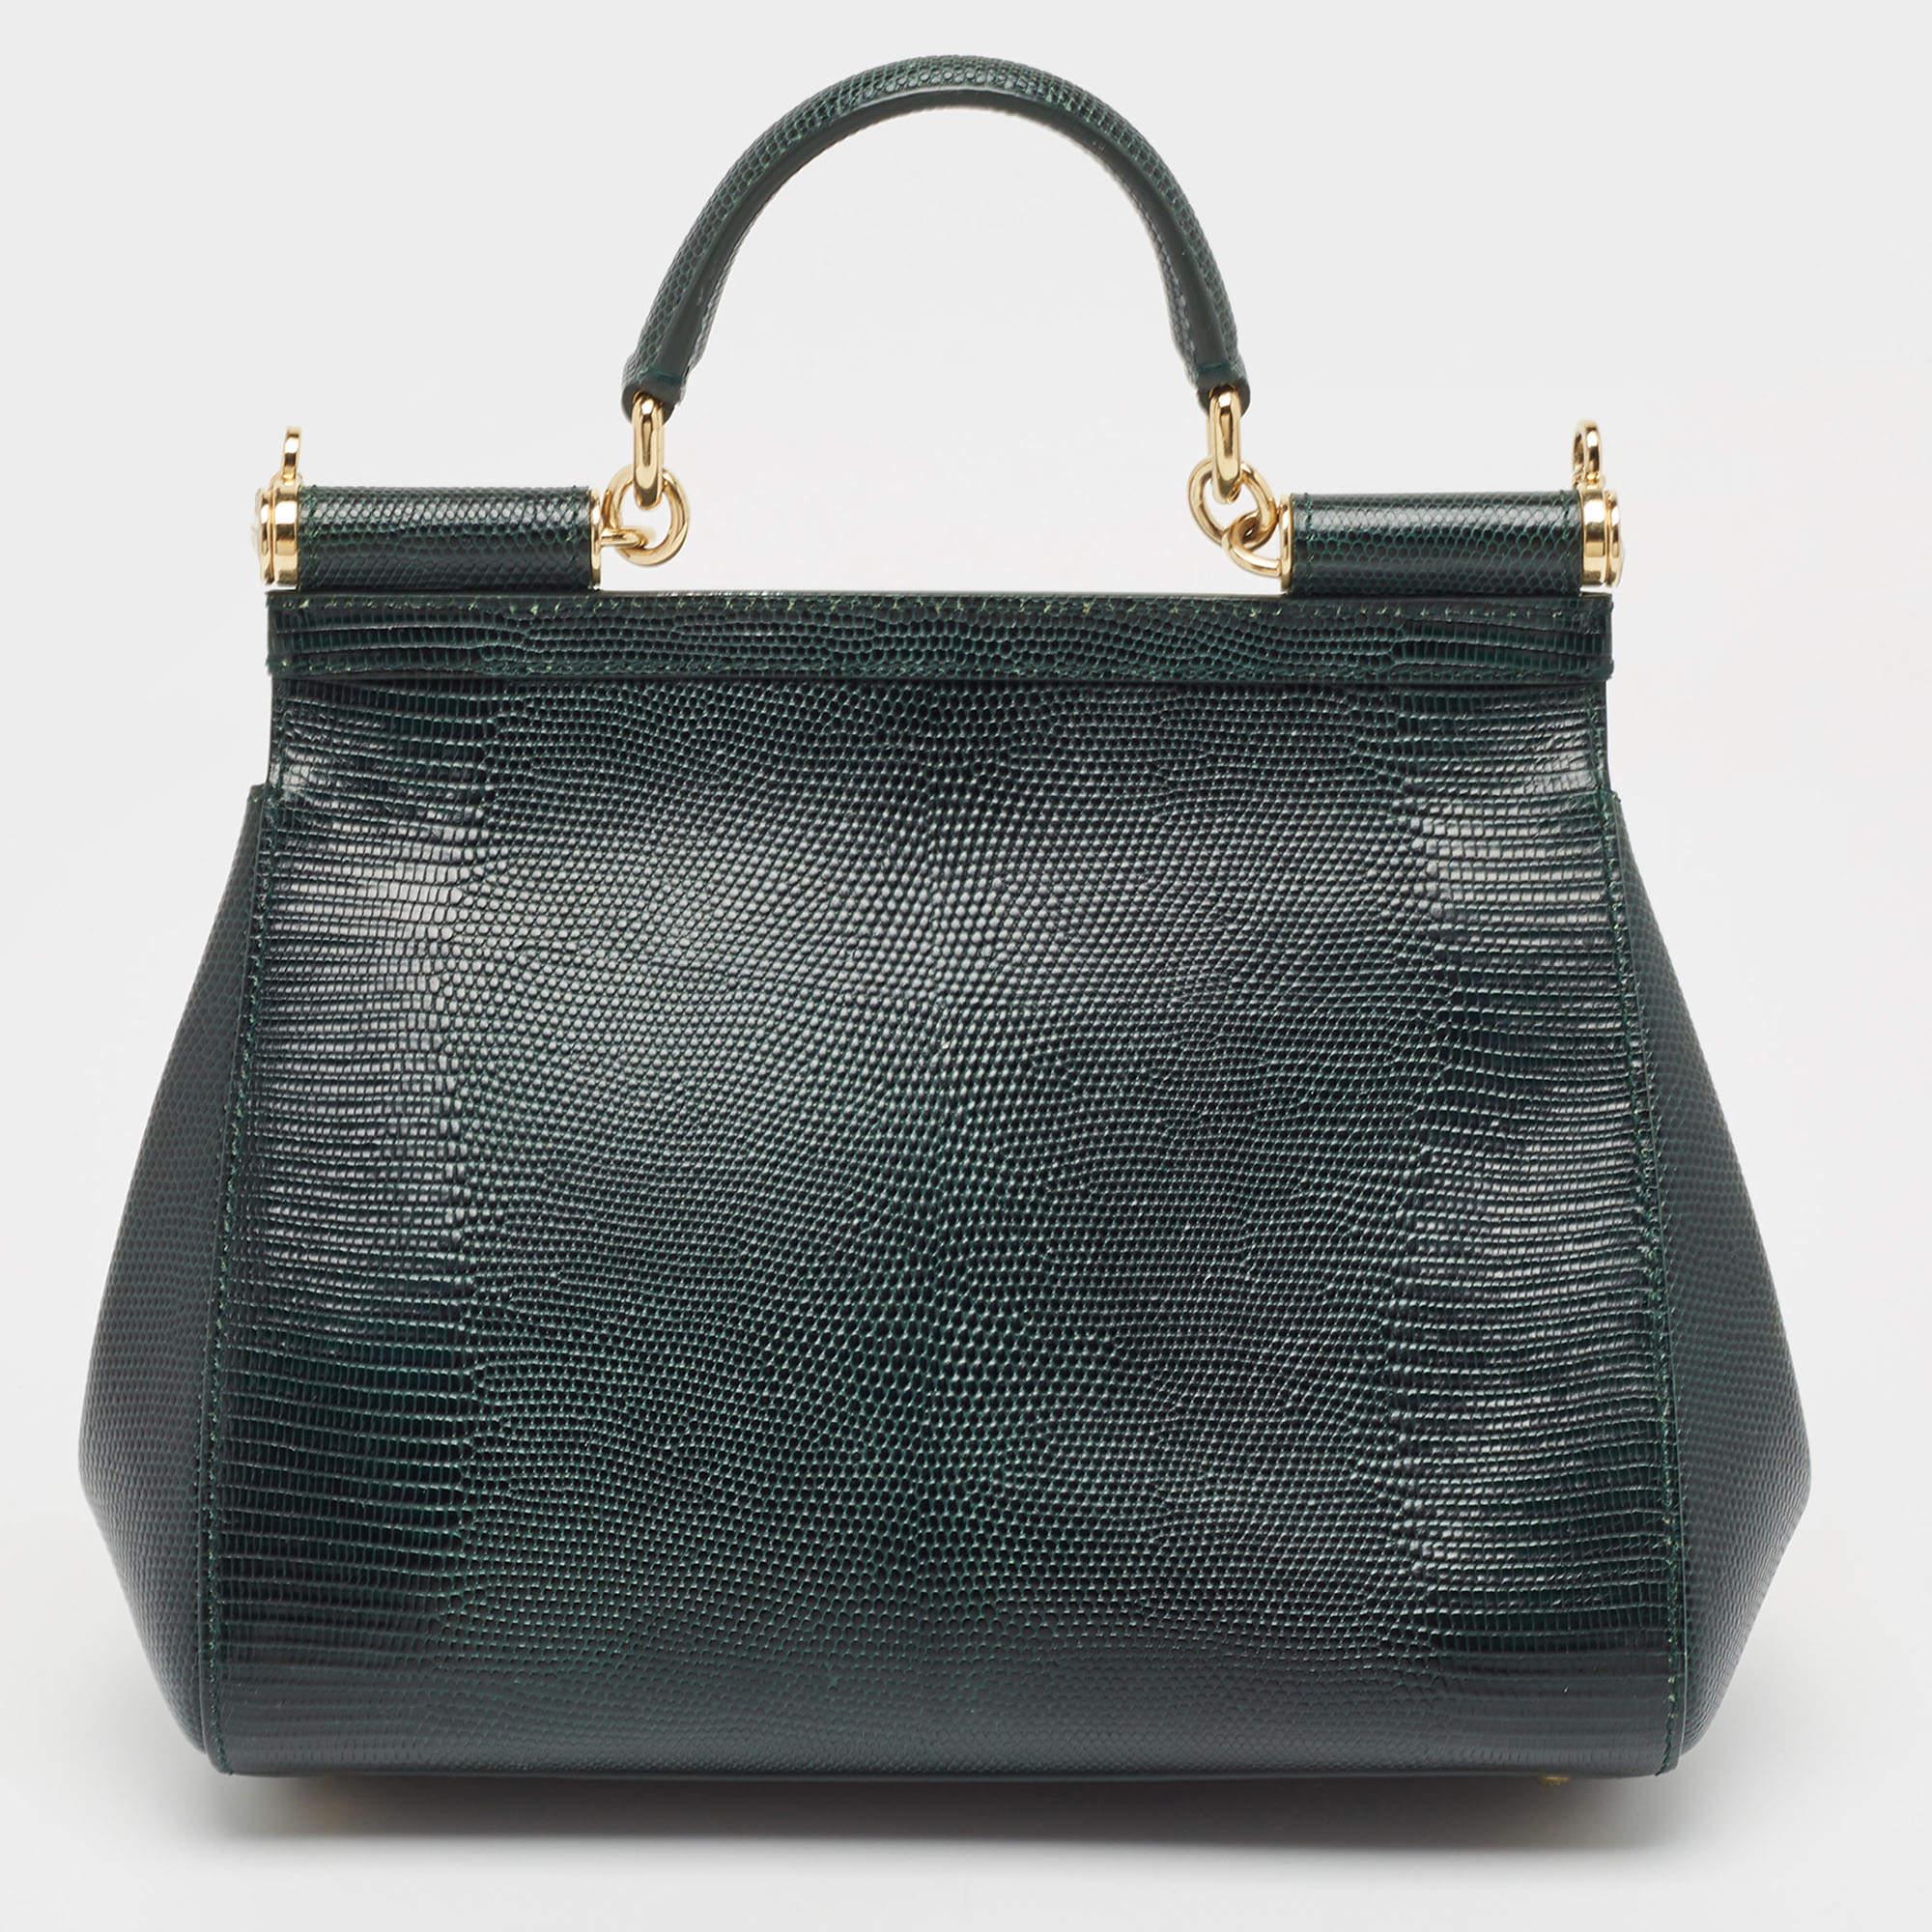 Presented for the 2009 Fall/Winter collection, Miss Sicily from Dolce & Gabbana represents the brand's regard for Italian essence and feminine style. This green creation comes made from Iizard-embossed leather and can be carried conveniently by dual